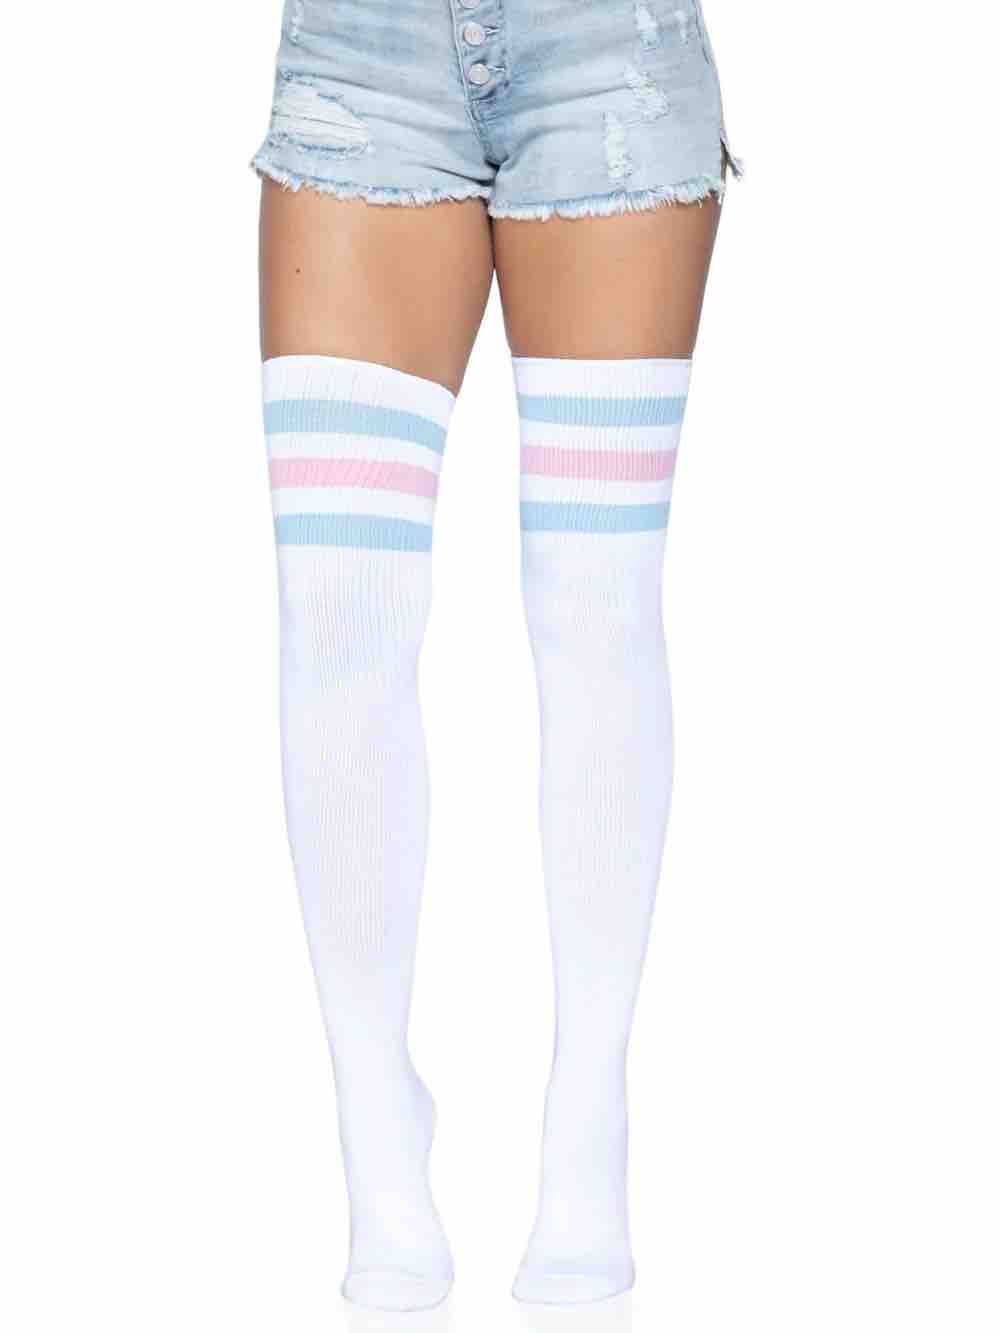 Model wearing the Trans Pride Over The Knee Athletic Socks with jean shorts.